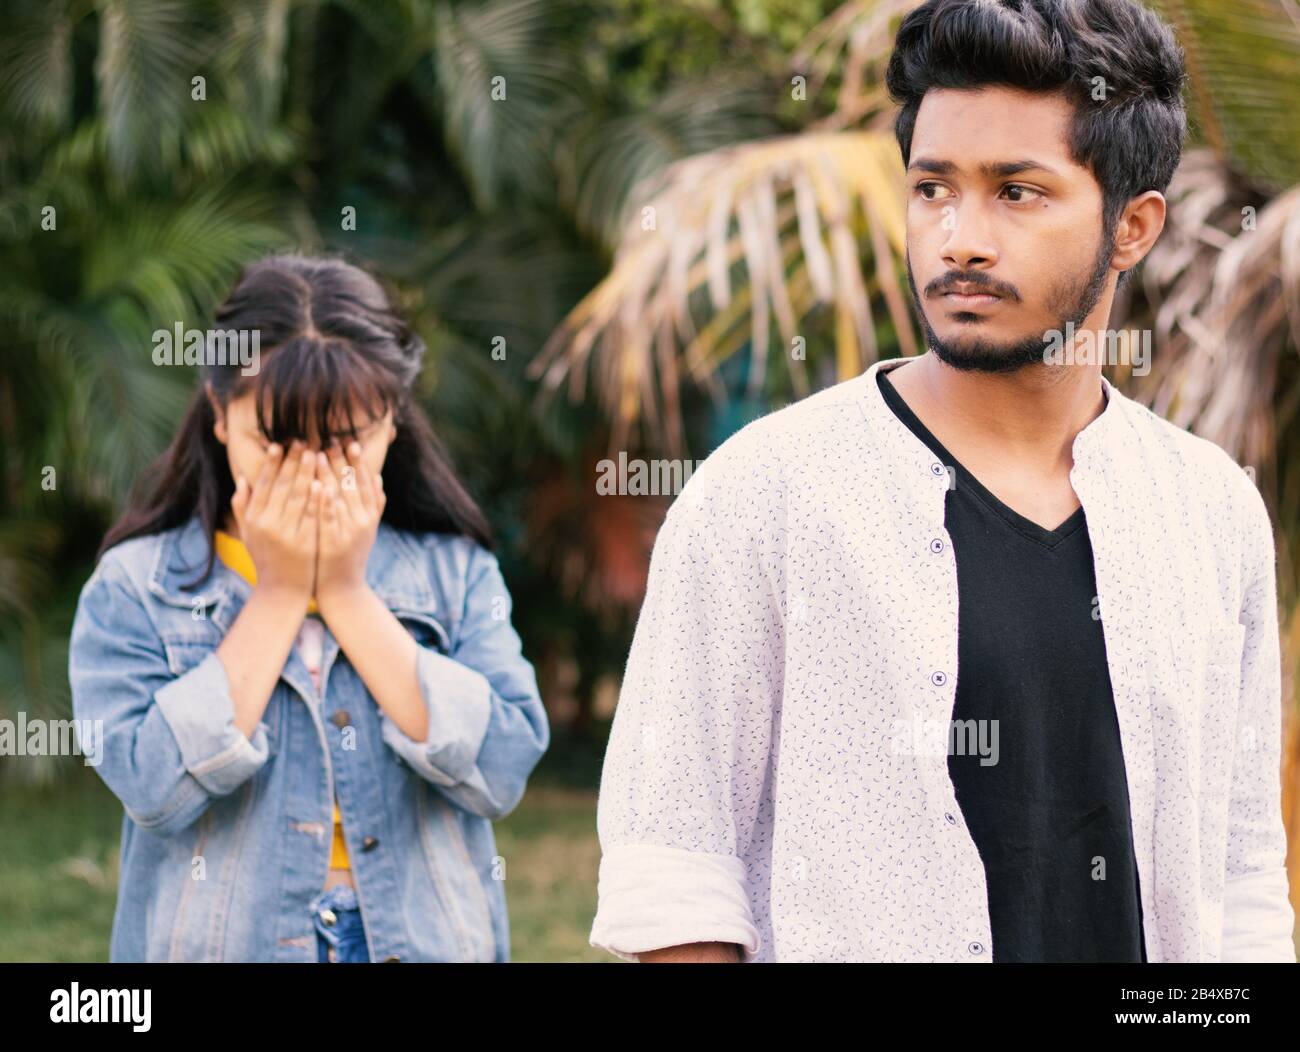 Concept of Teenager couple love breakup - The angry serious boyfriend leaves his sad girlfriend behind. Stock Photo